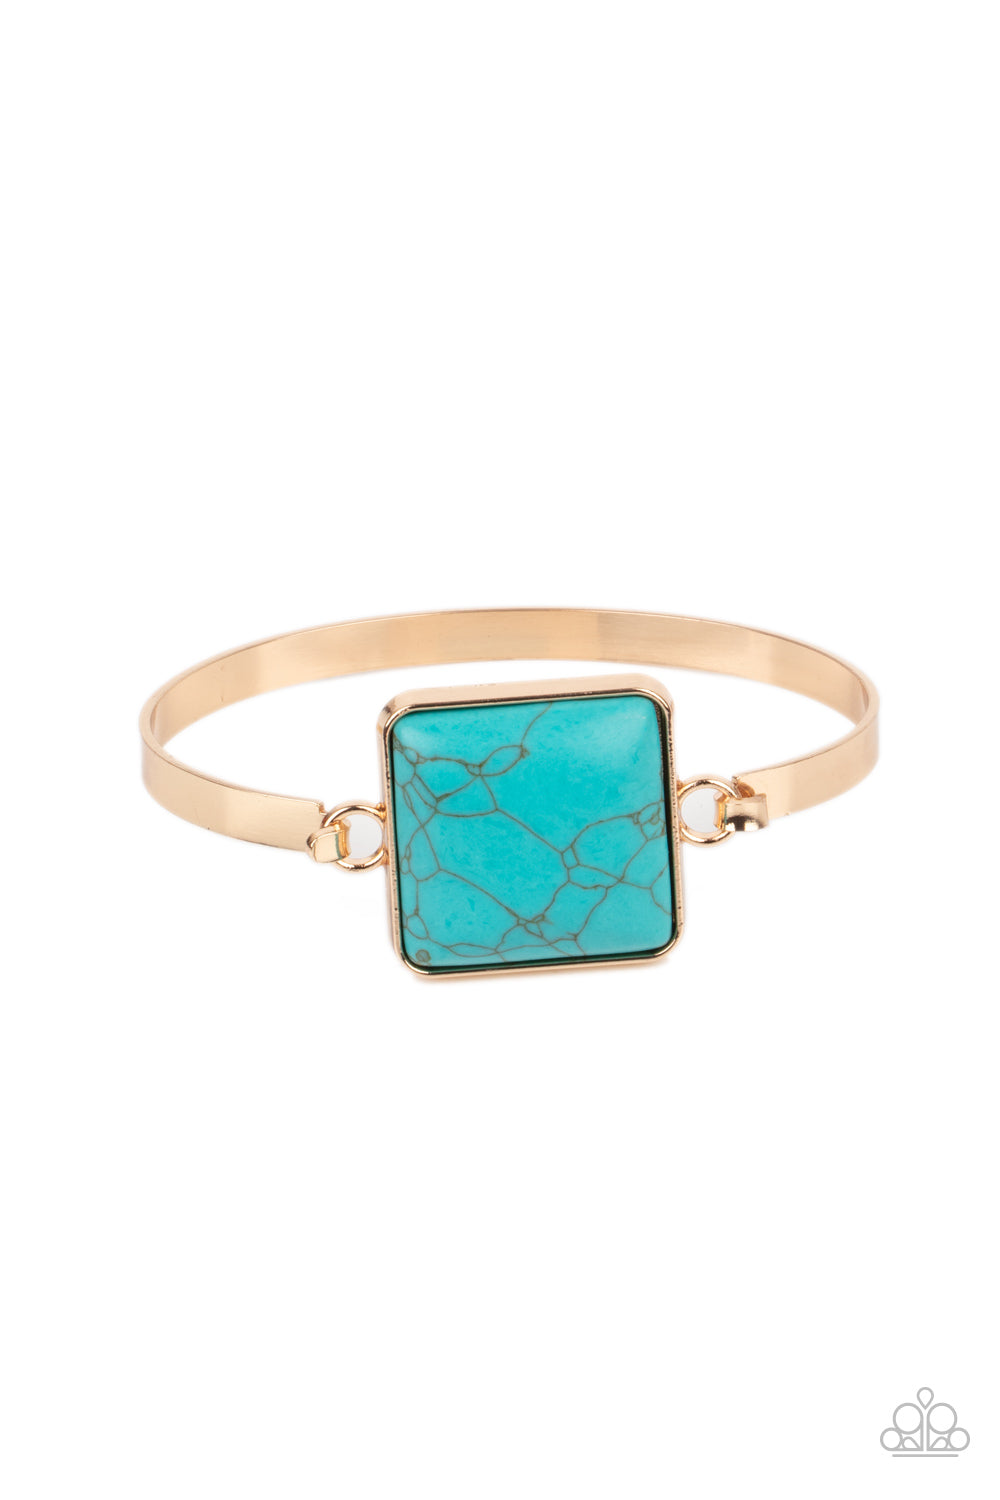 A square turquoise stone frame links with one side of a shiny gold cuff, while the other side of the classic frame hinges to the other side, creating a versatile fit. Features a hinged closure.